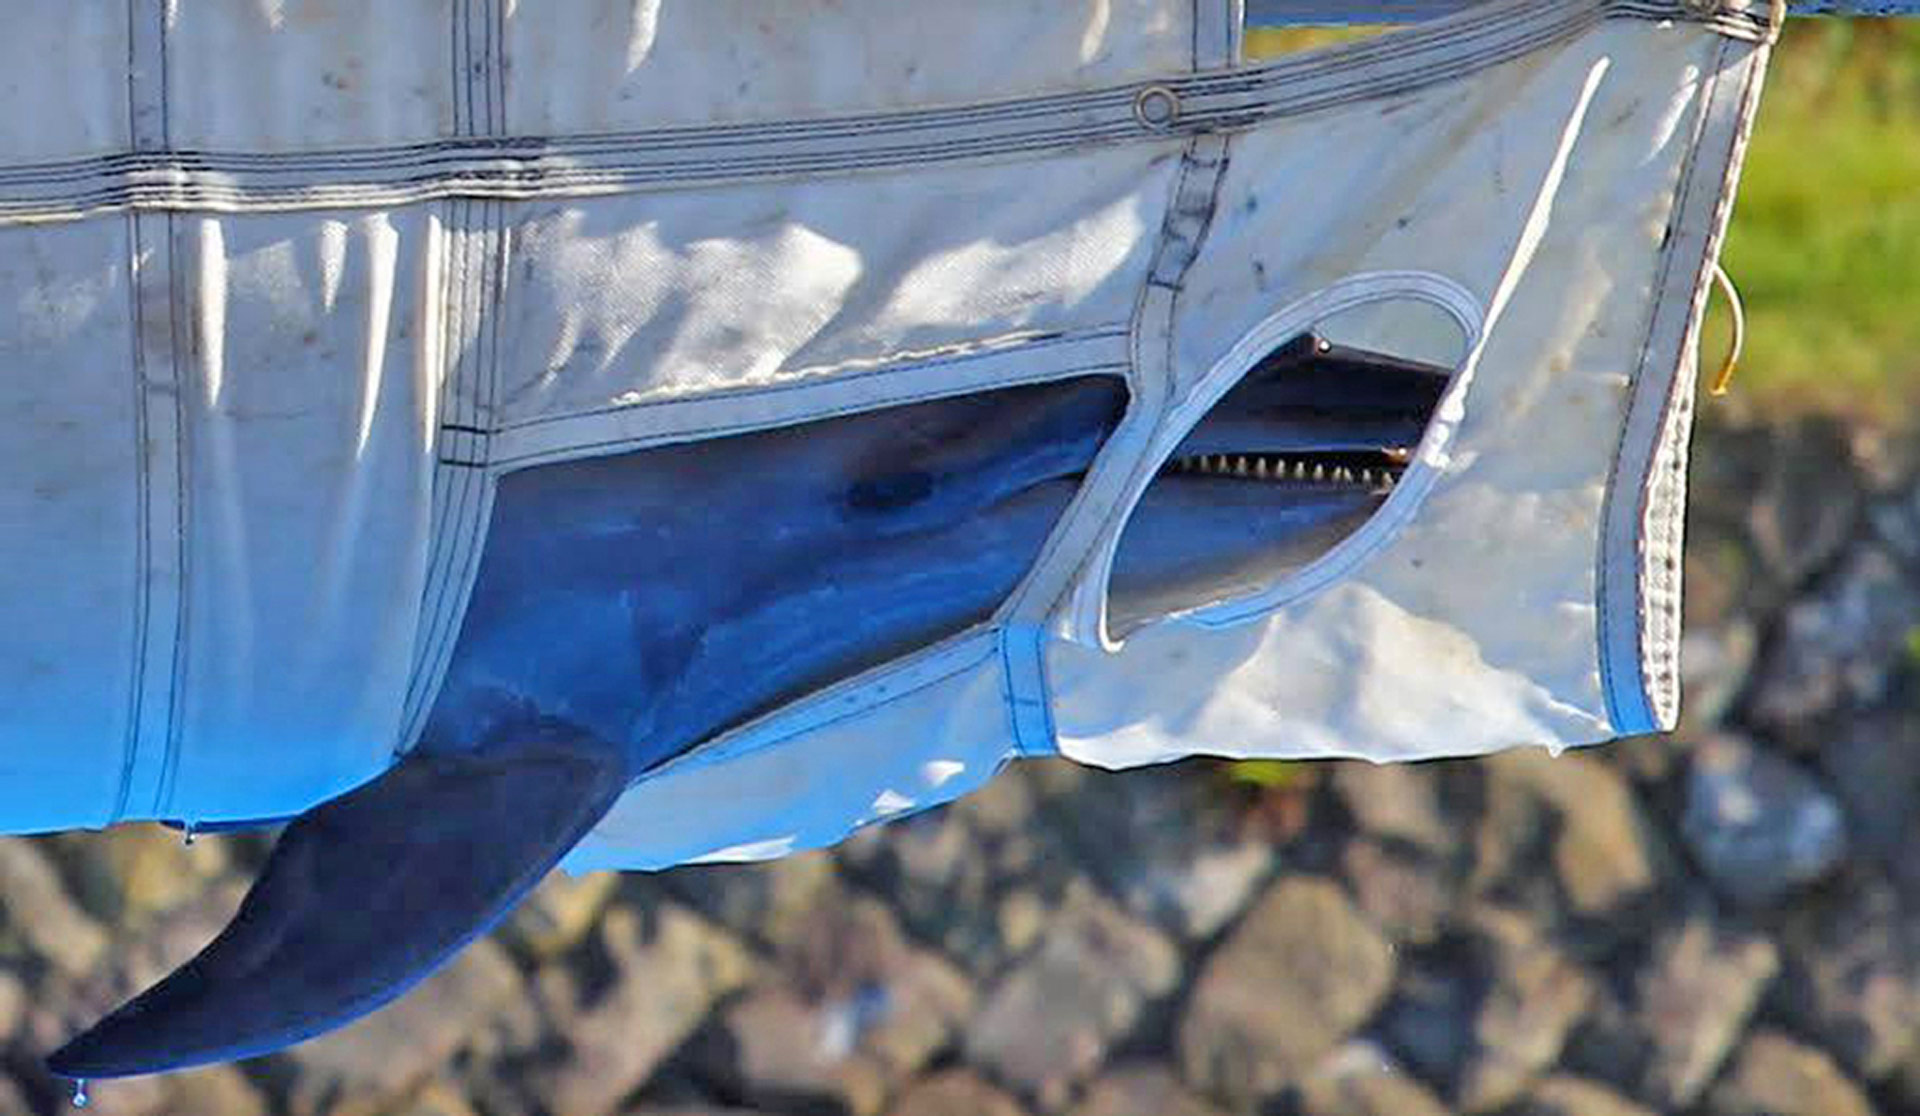 The corpse of a dolphin is removed from a pen in Taiji. He has not survived the stressful capture. Photo: Ric O’Barry’s Dolphin Project